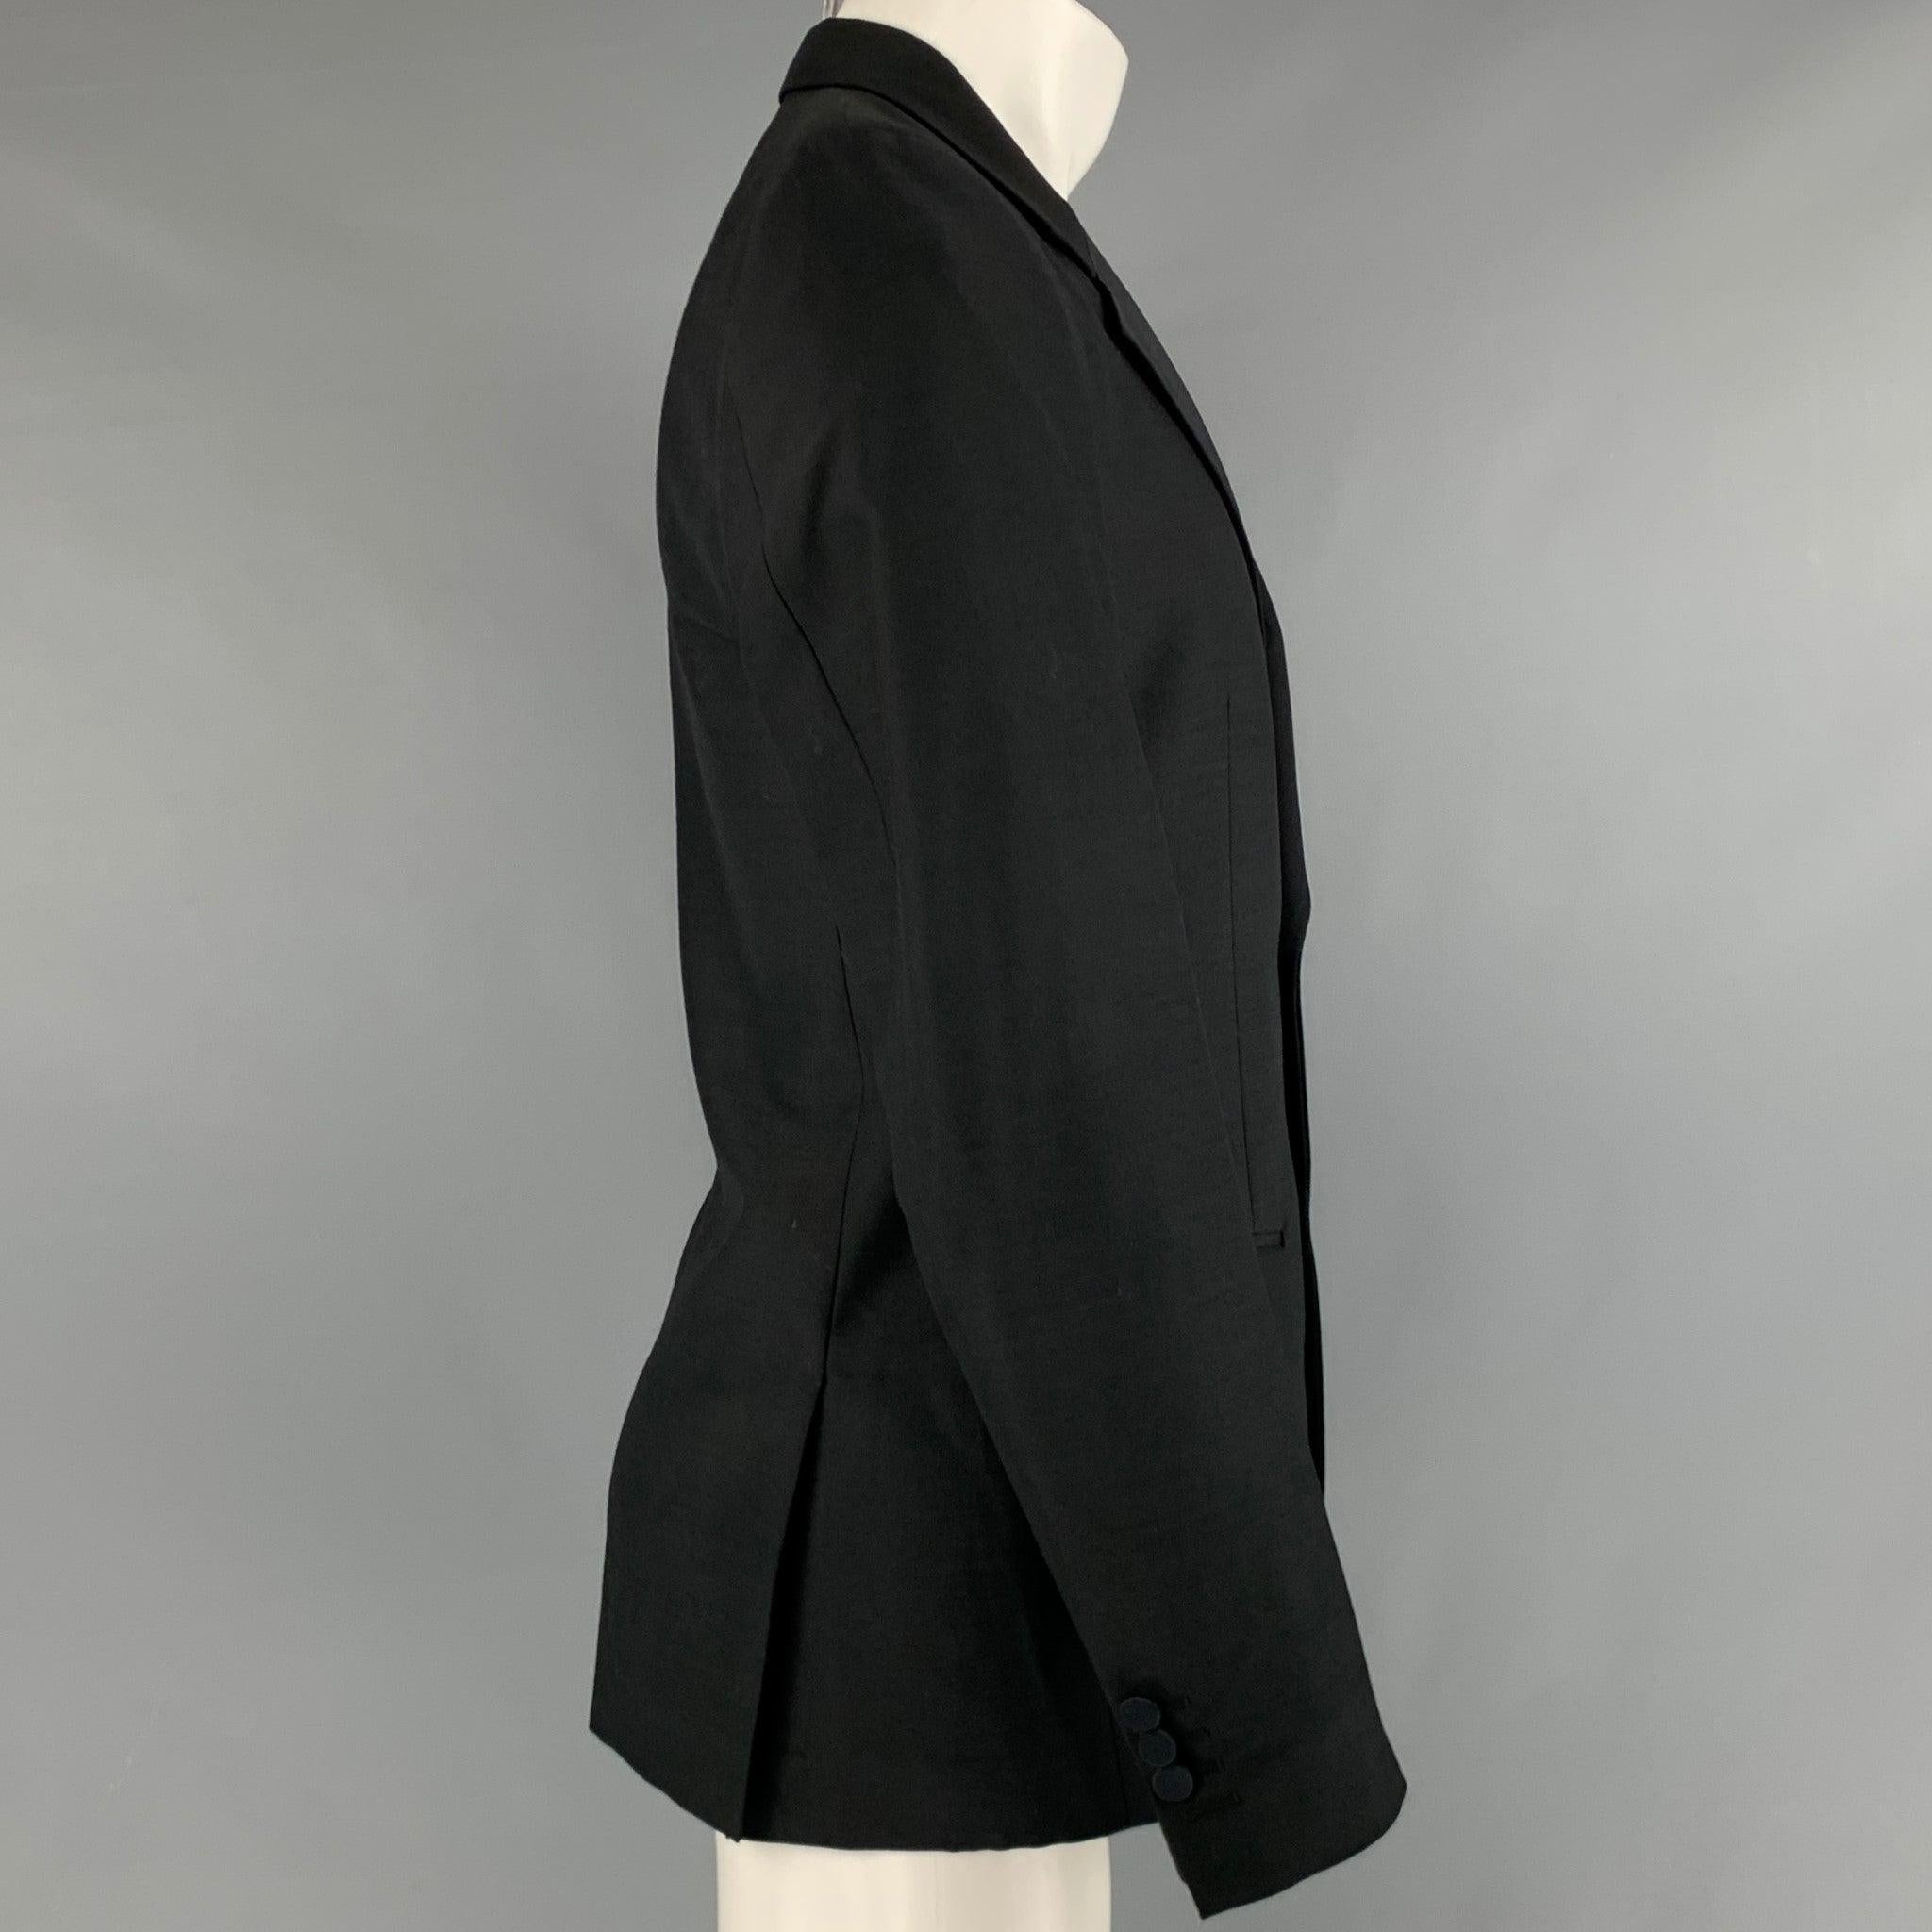 MARC JACOBS tuxedo sport coat
in a black wool polyester blend fabric featuring notch lapel, double vented back, and two button closure. Made in Italy.Very Good Pre-Owned Condition. Minor marks. 

Marked:   48 

Measurements: 
 
Shoulder: 16.5 inches